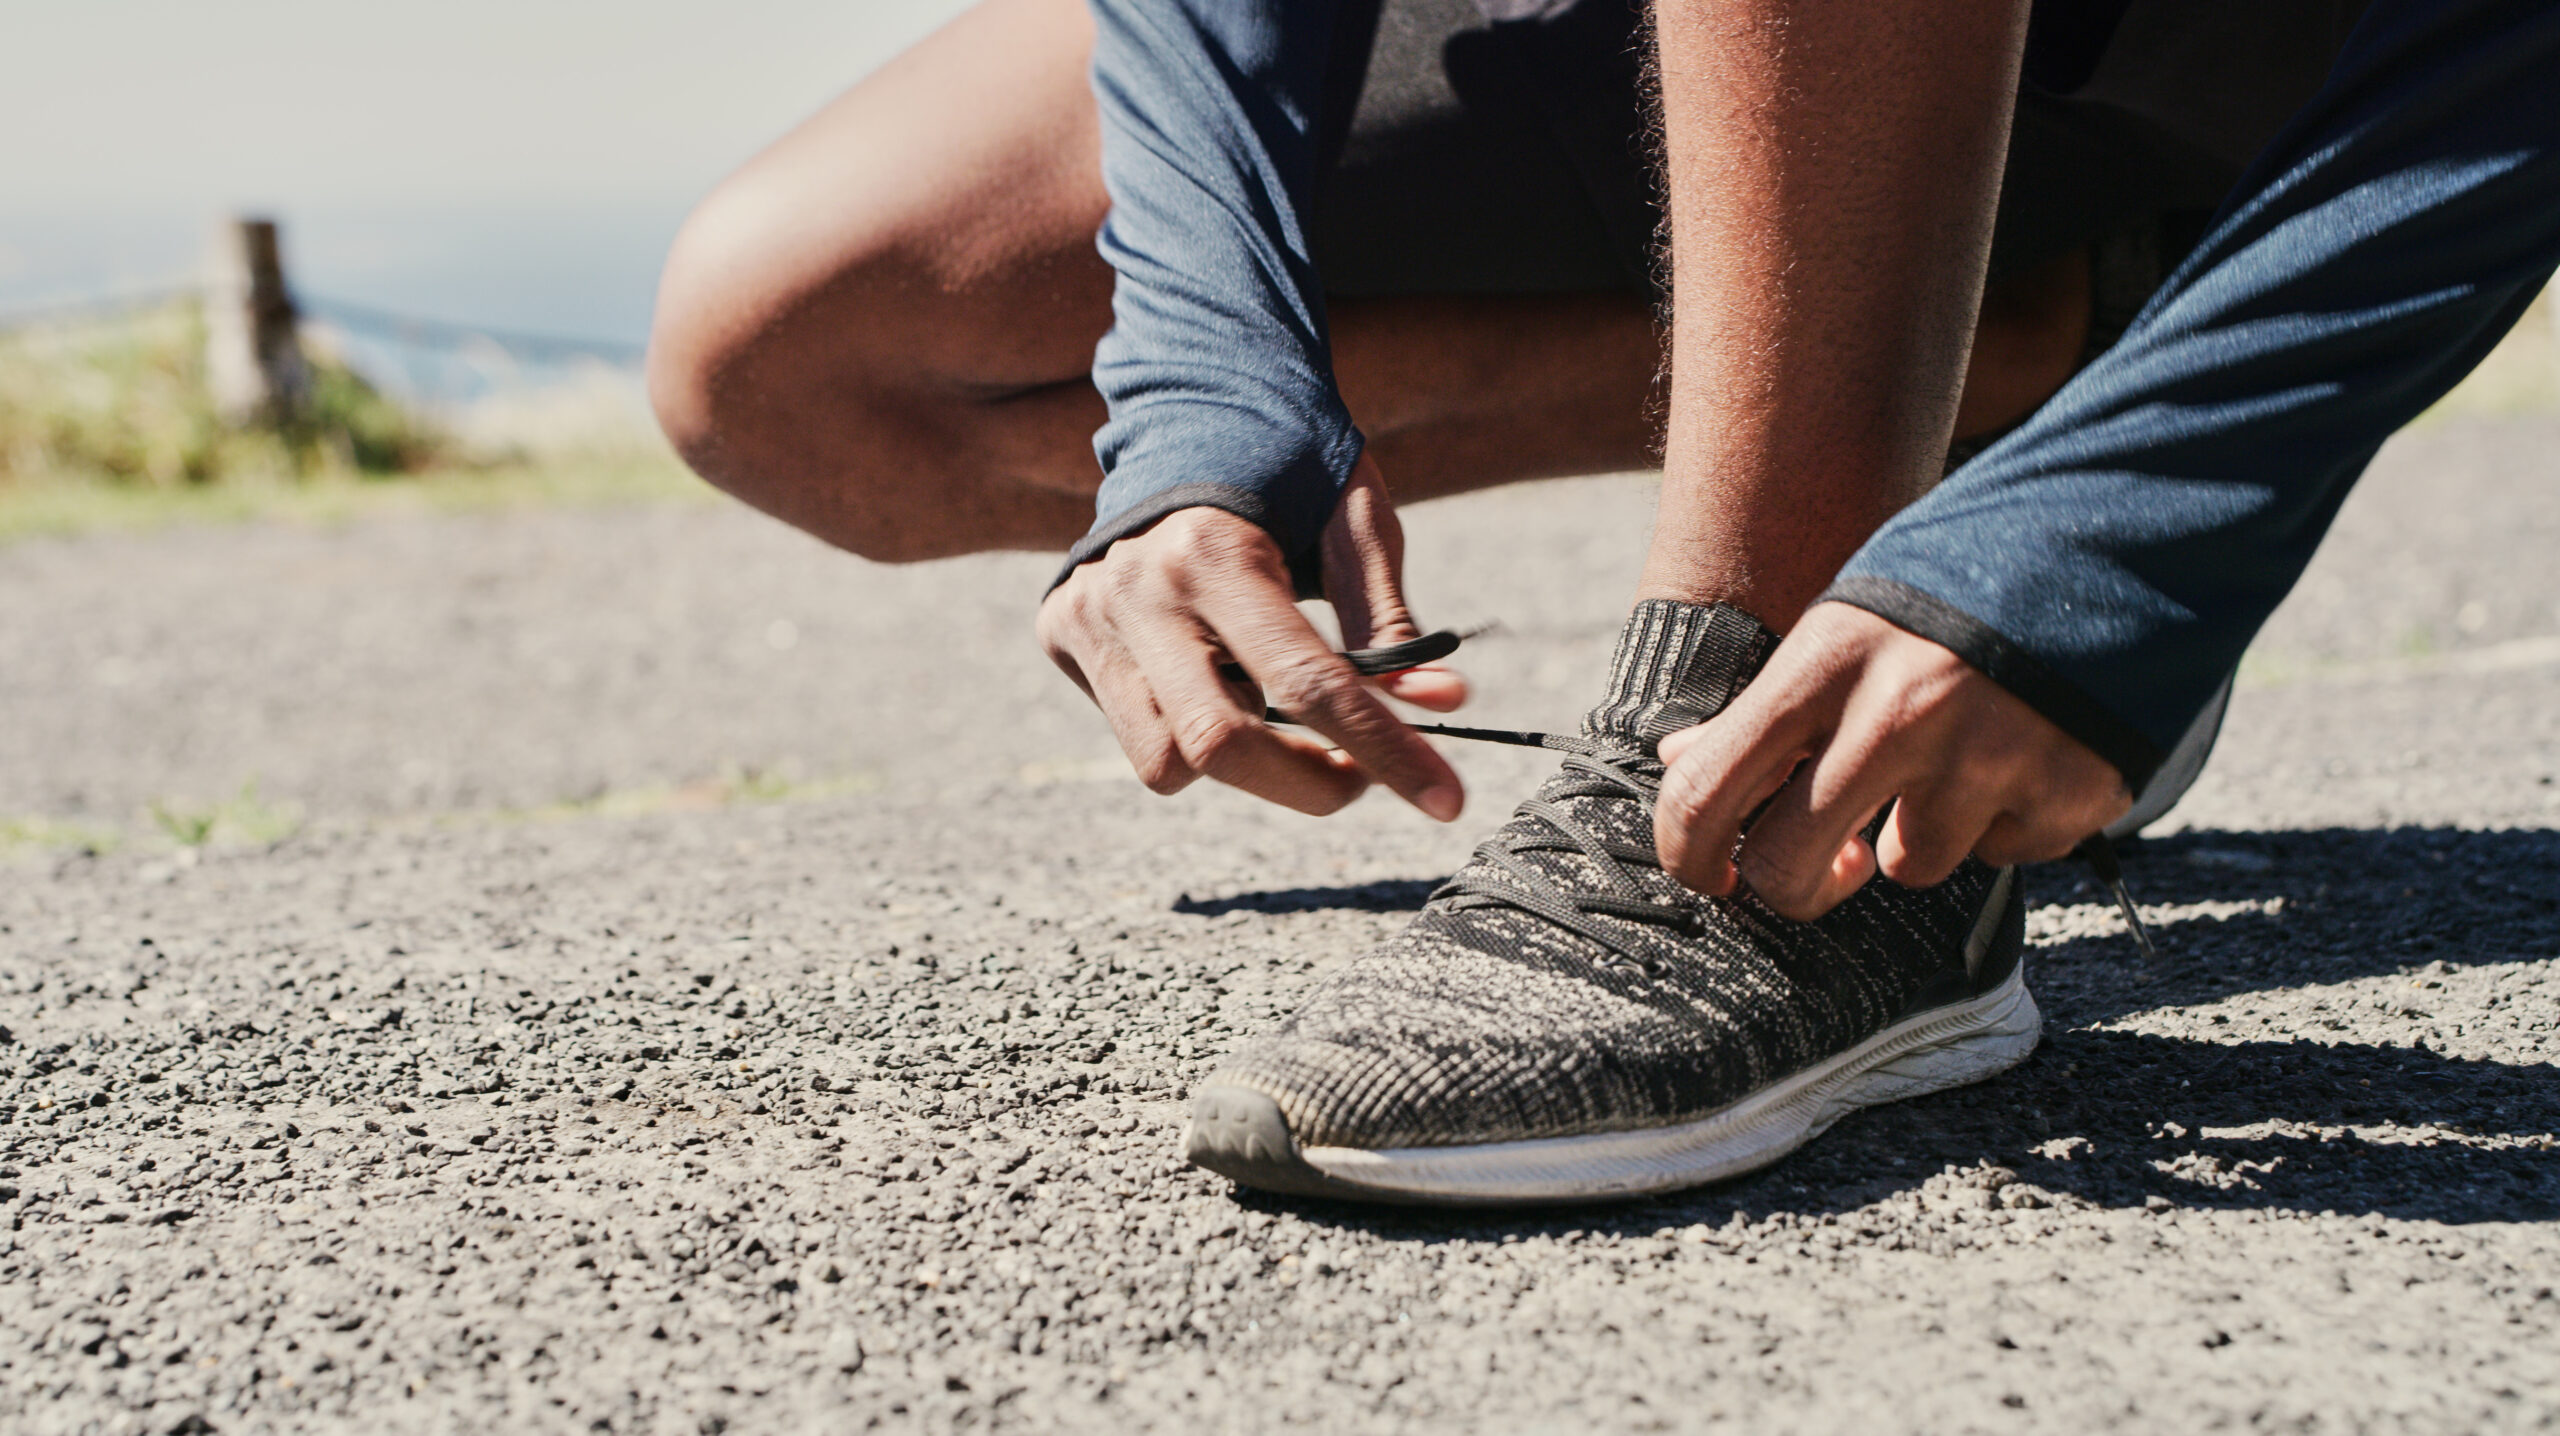 Cropped shot of a man tying his shoelaces while out for a run.